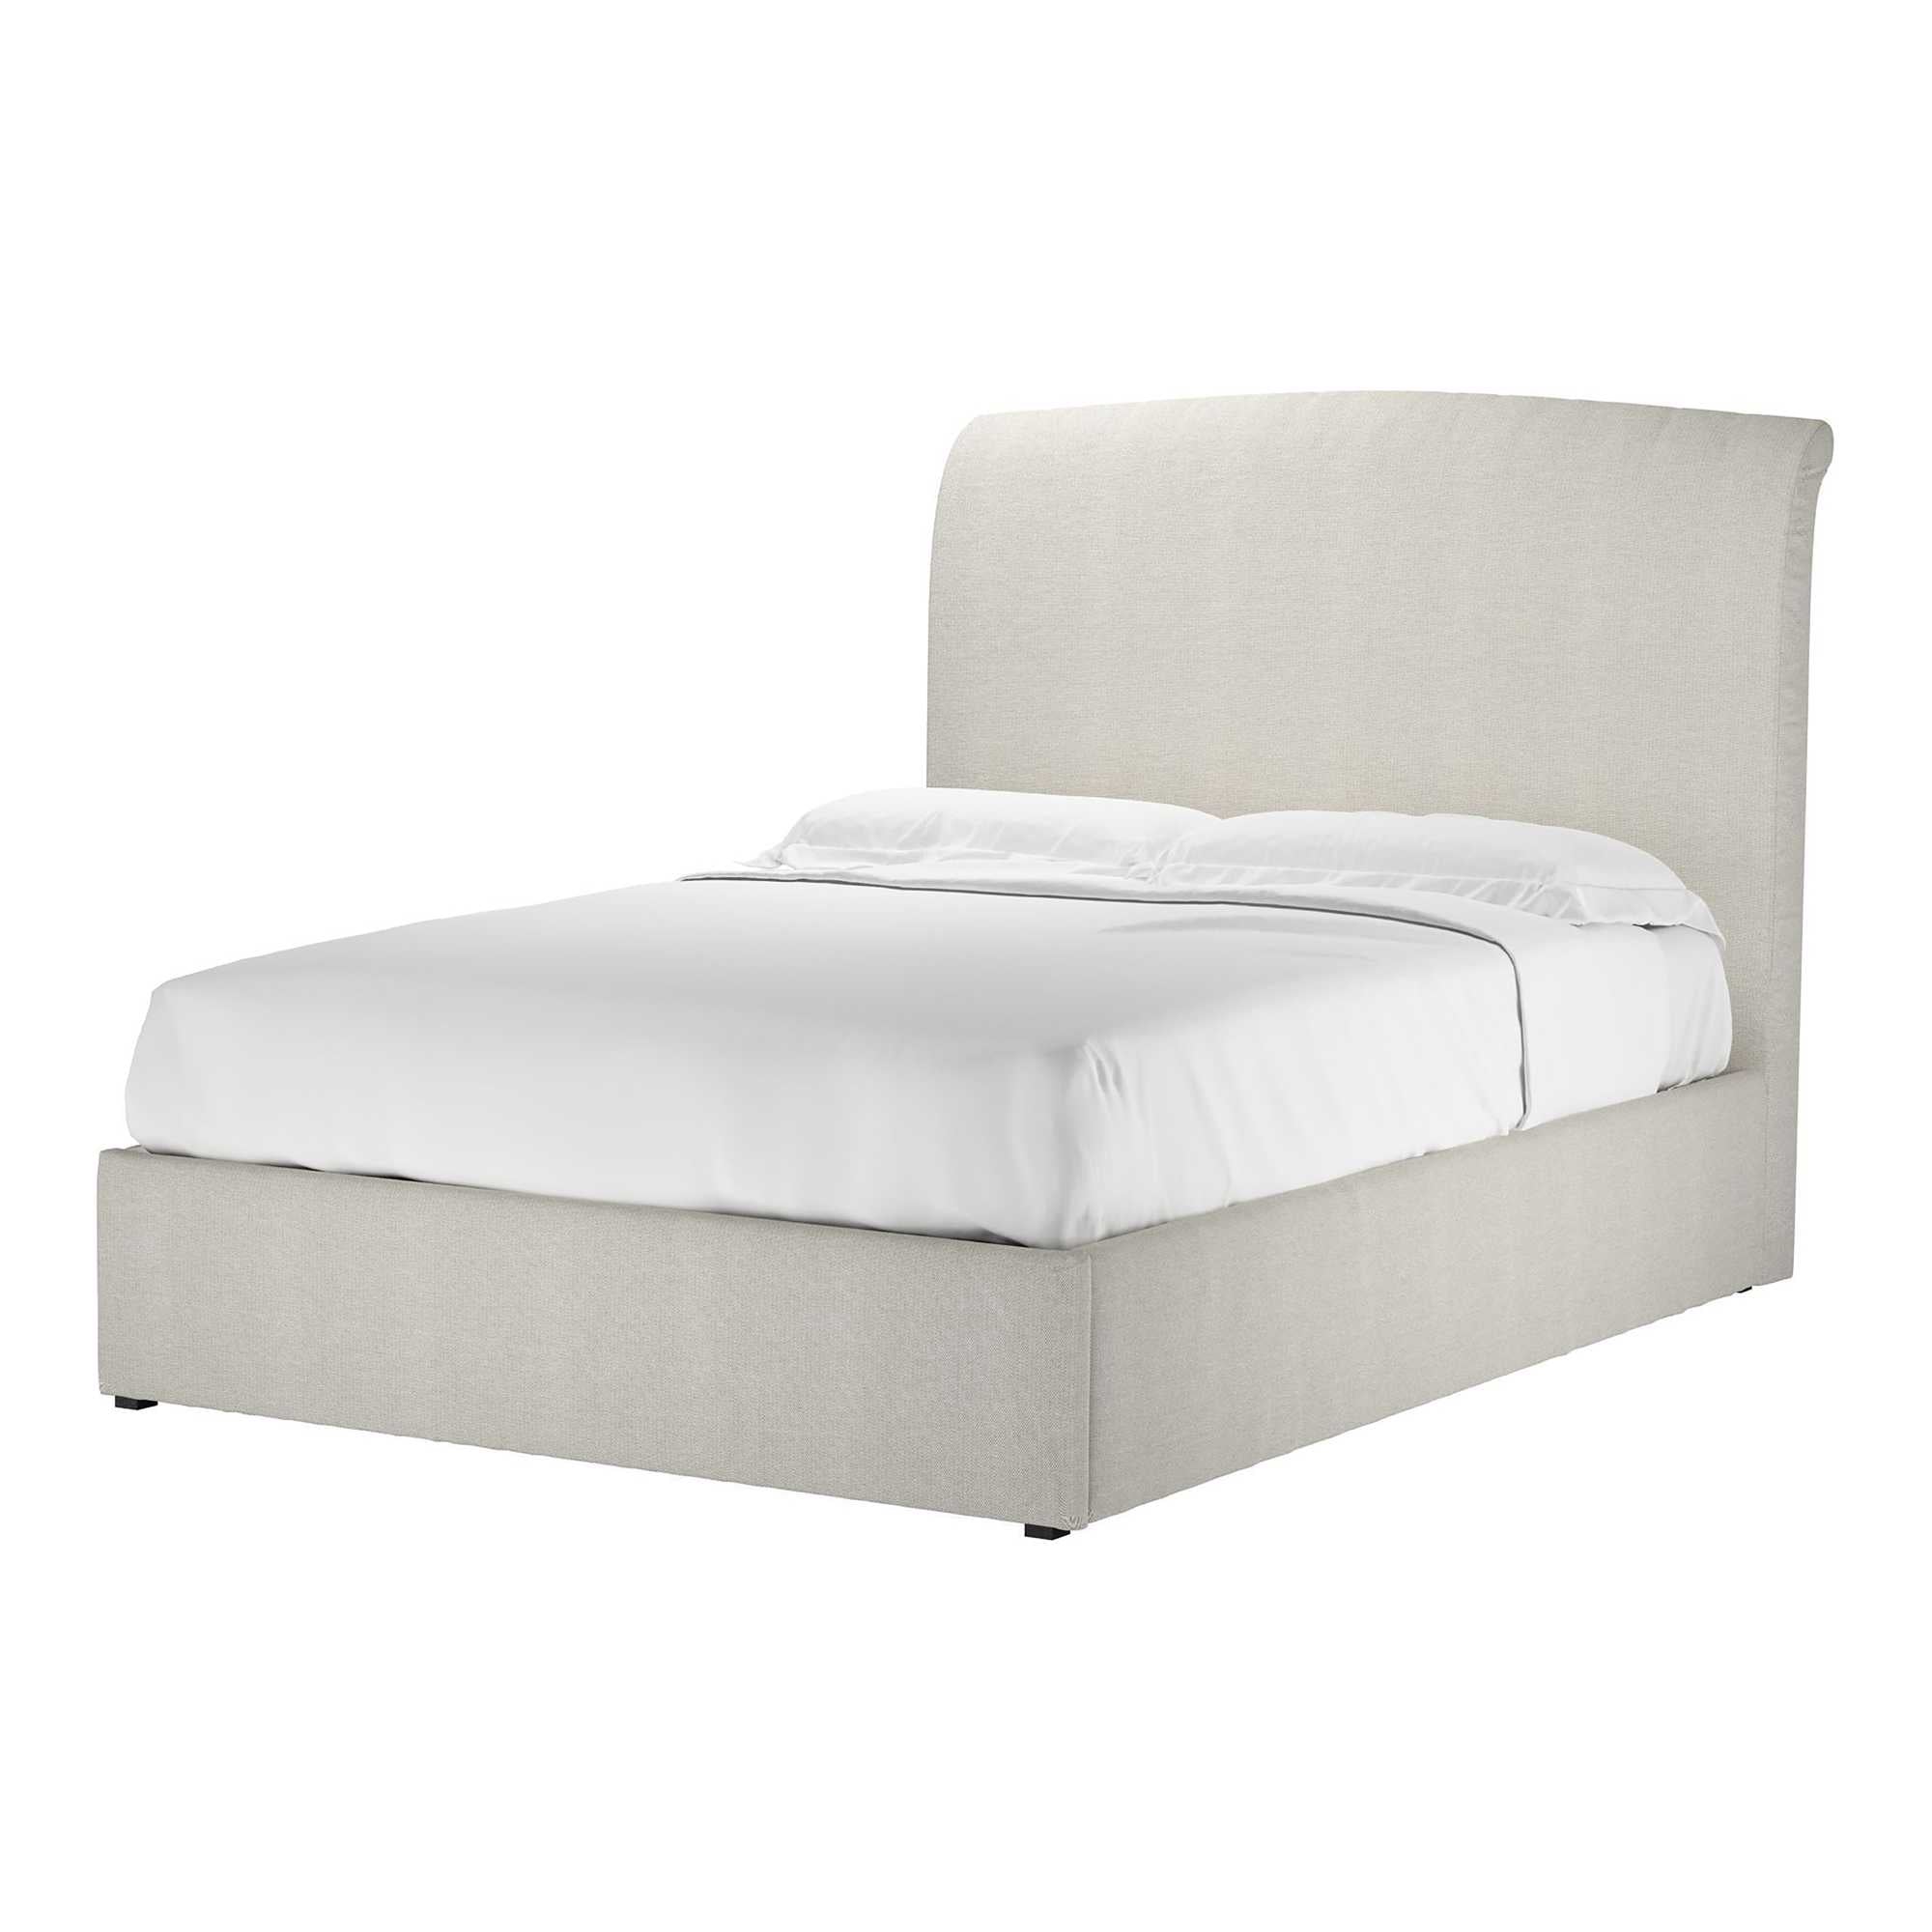 Thea Clay House Basket Weave Ottoman Bed - Double Size